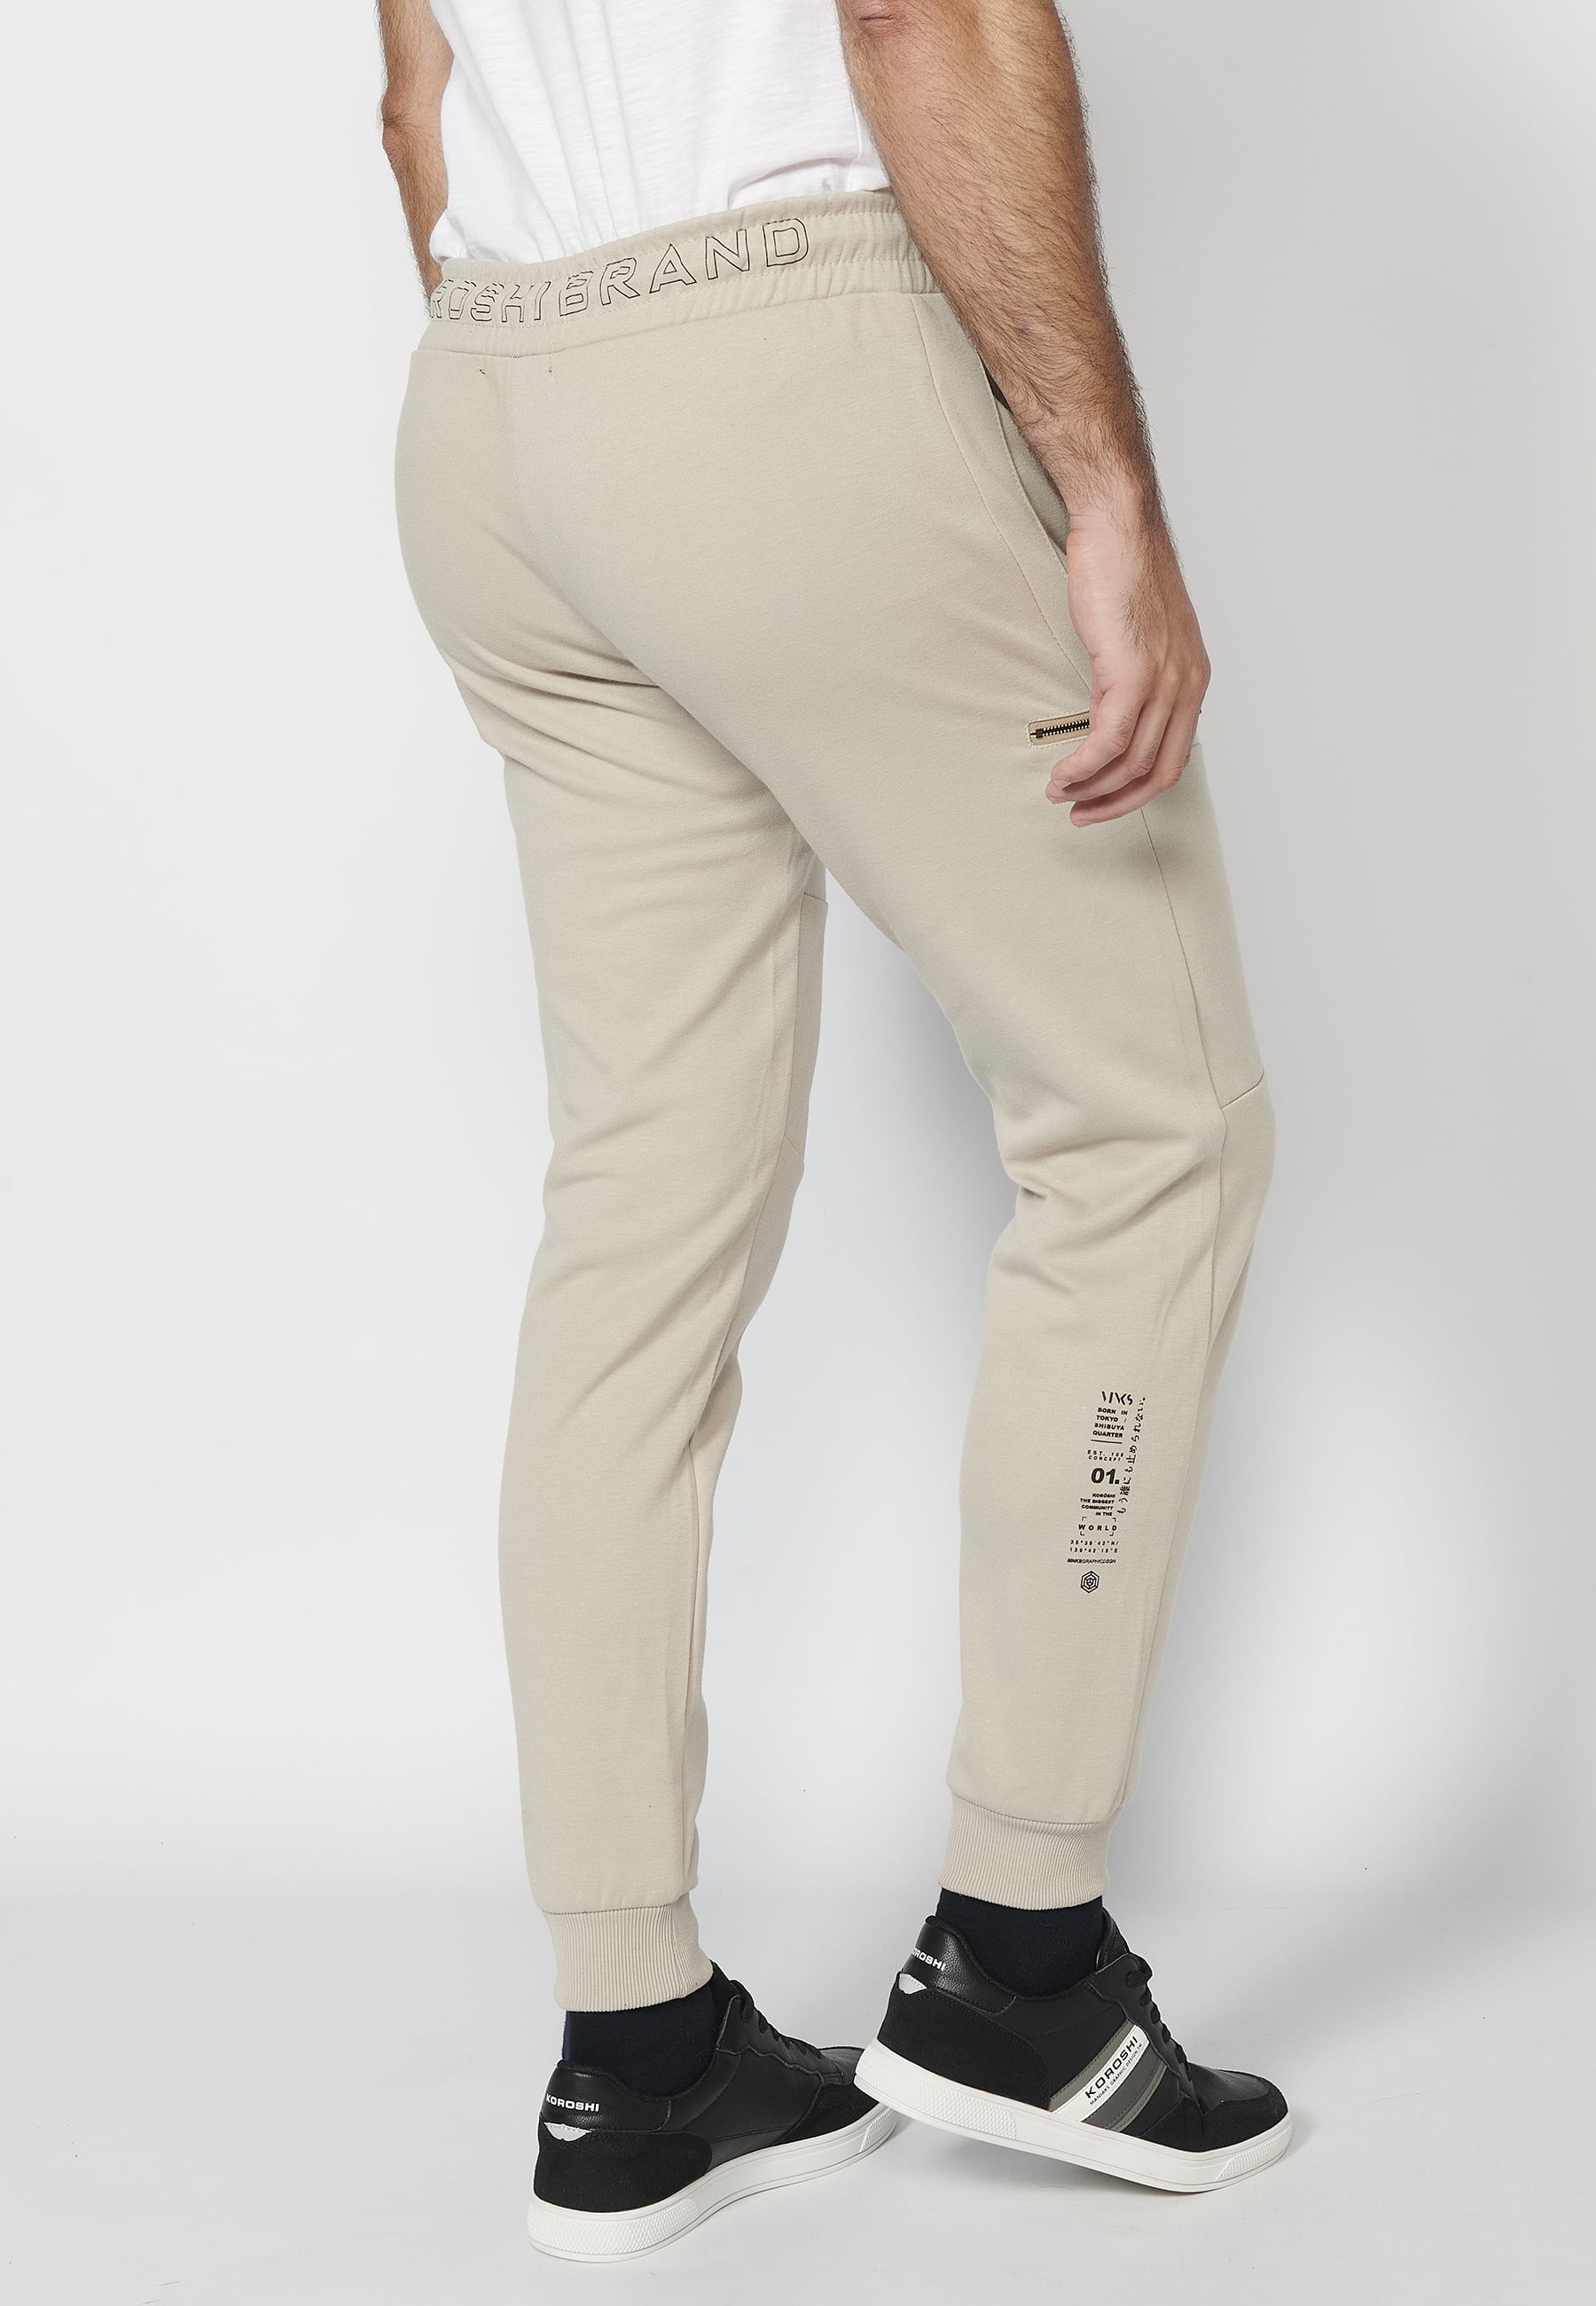 Long jogger pants with a rubberized waist and drawstring with cut-outs in the knees, Stone color, for Men 8